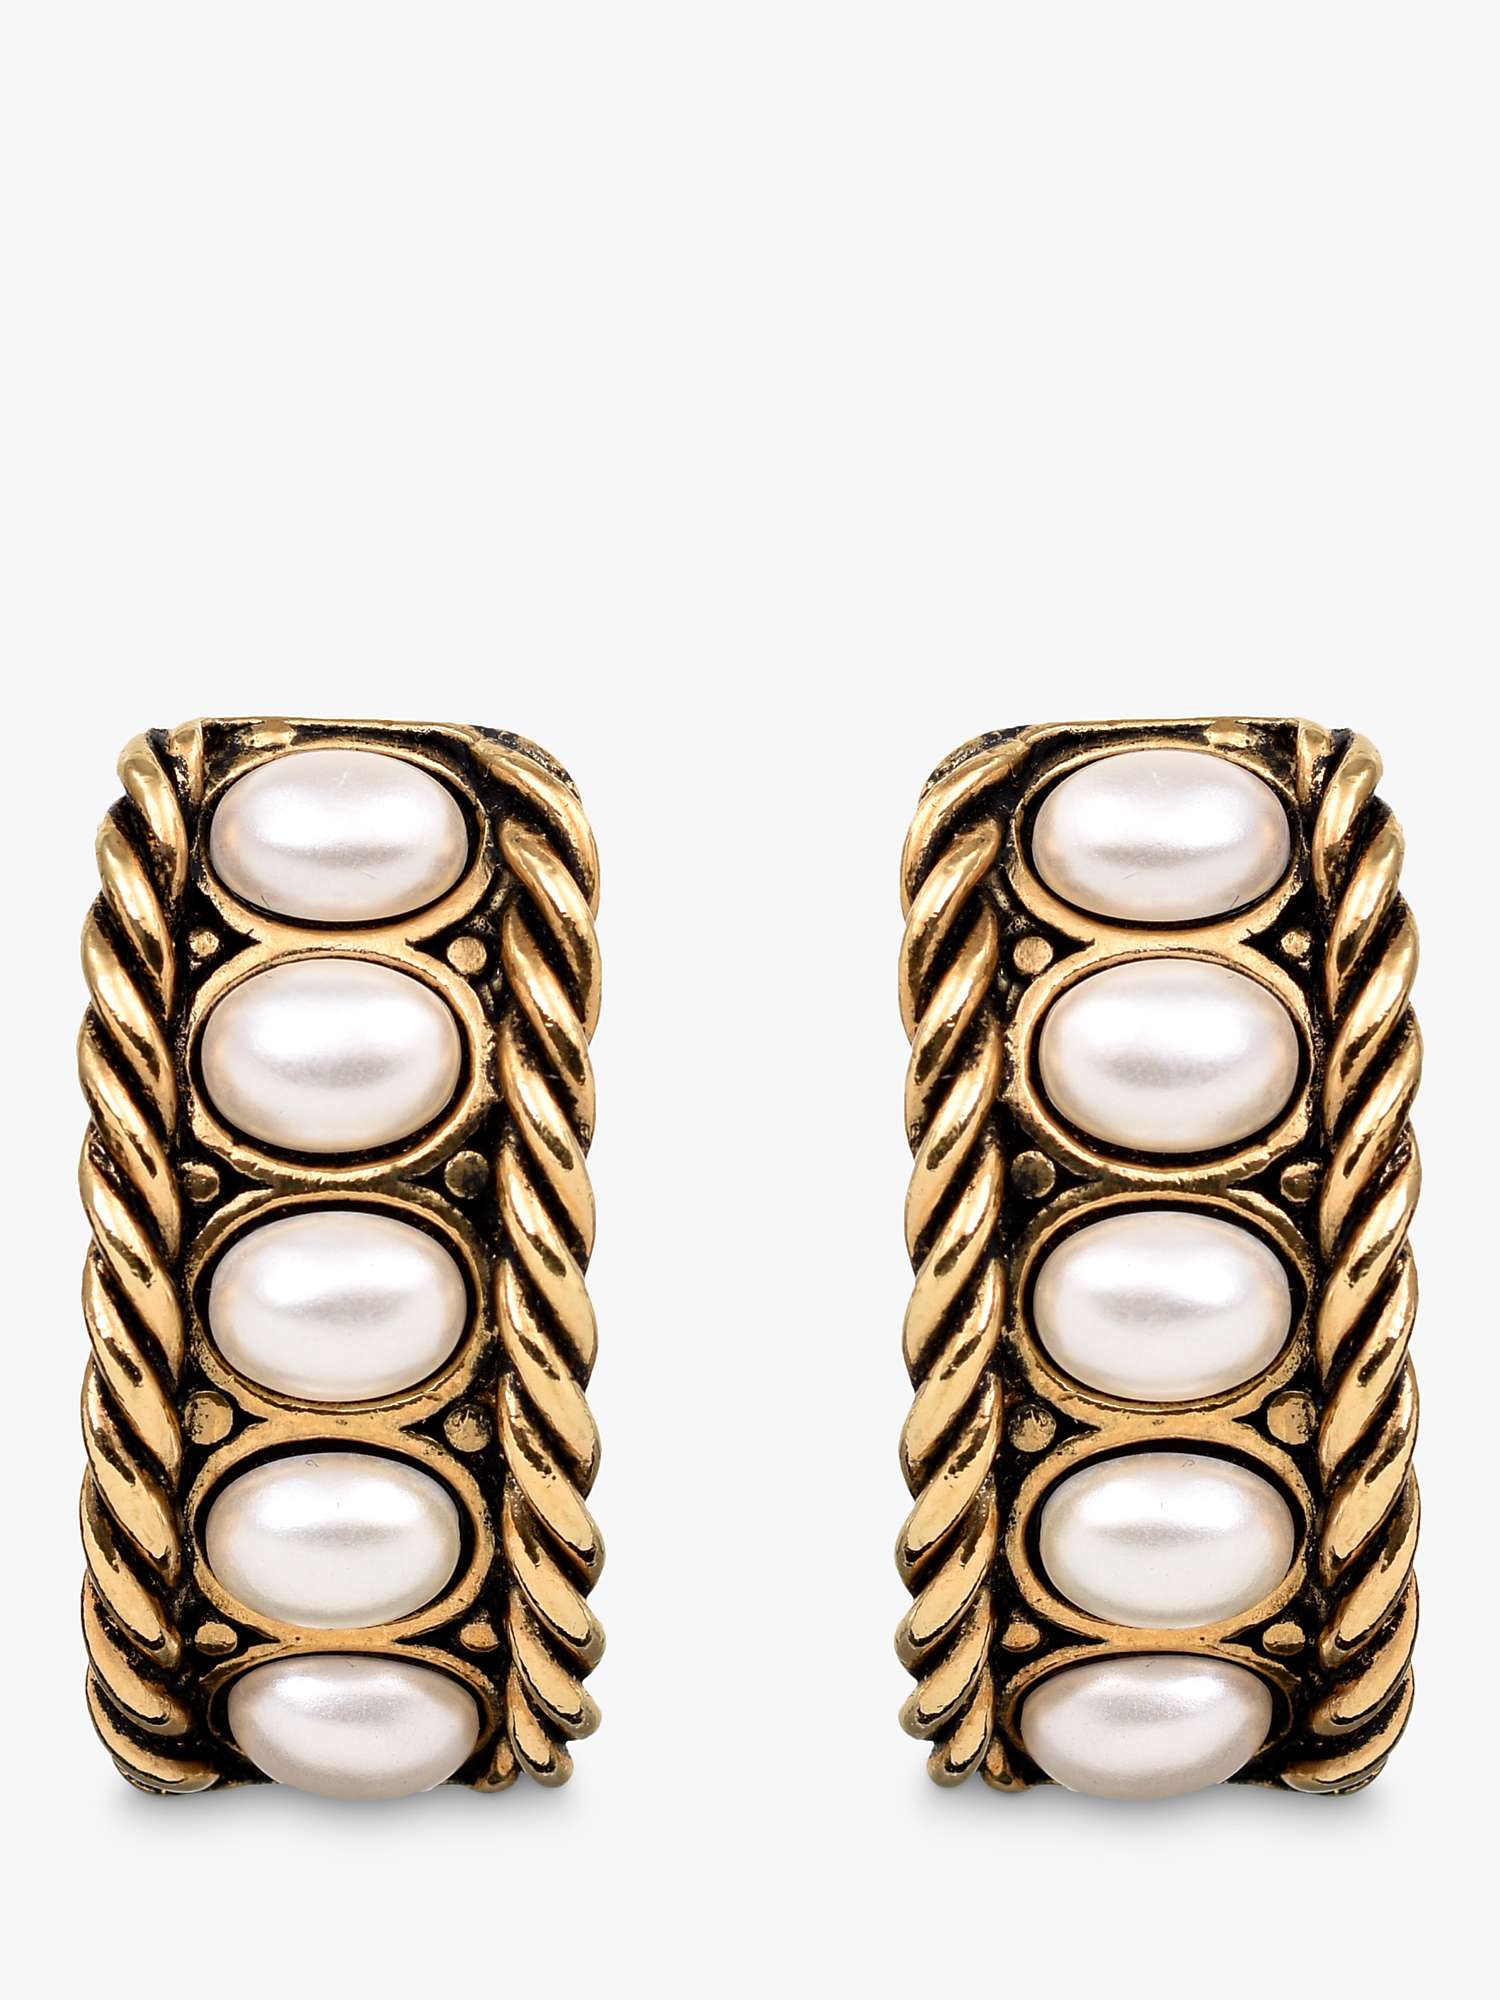 Buy Eclectica Vintage 18ct Gold Plated Faux Pearl Cabouchon Clip-On Hoop Earrings, Dated Curca 1980s, Gold Online at johnlewis.com